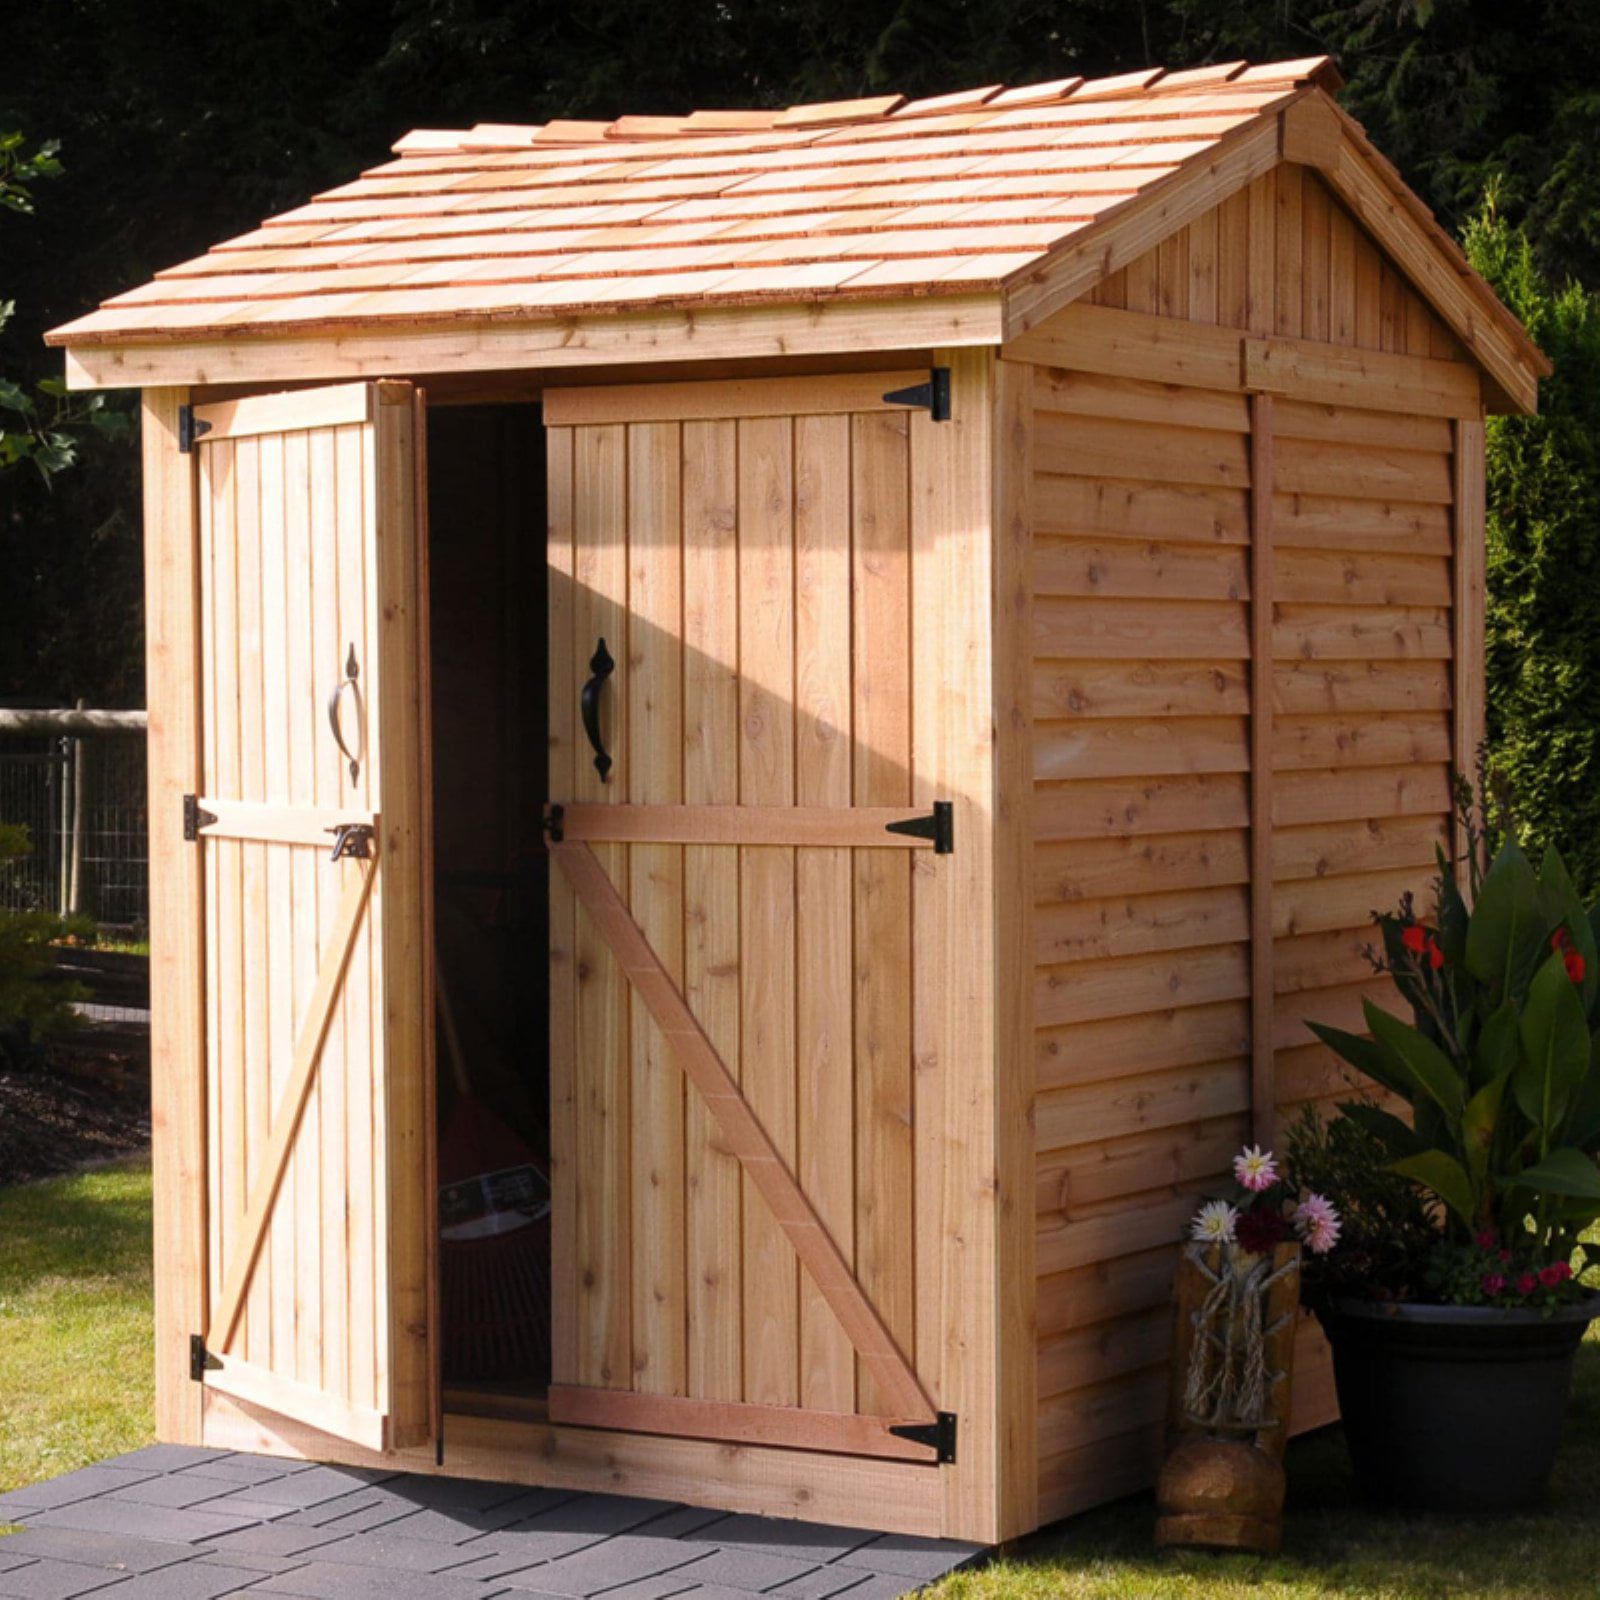 Outdoor Living Today Maximizer 6 x 6 ft. Storage Shed - Walmart.com